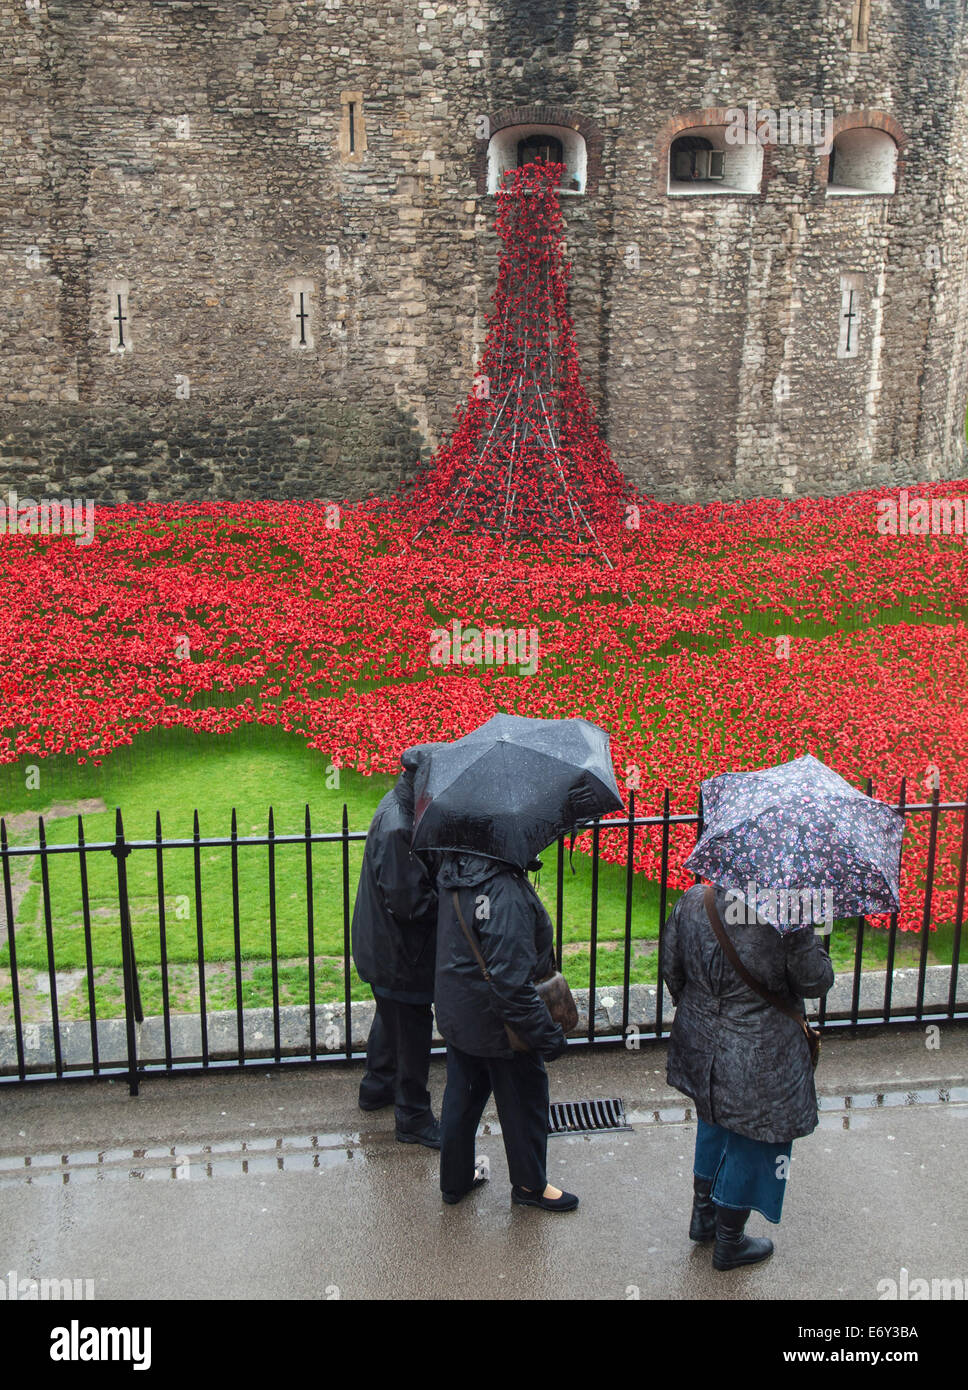 tourists with umbrellas viewing the ceramic poppies exhibit  at the tower of london during heavy rain. Stock Photo